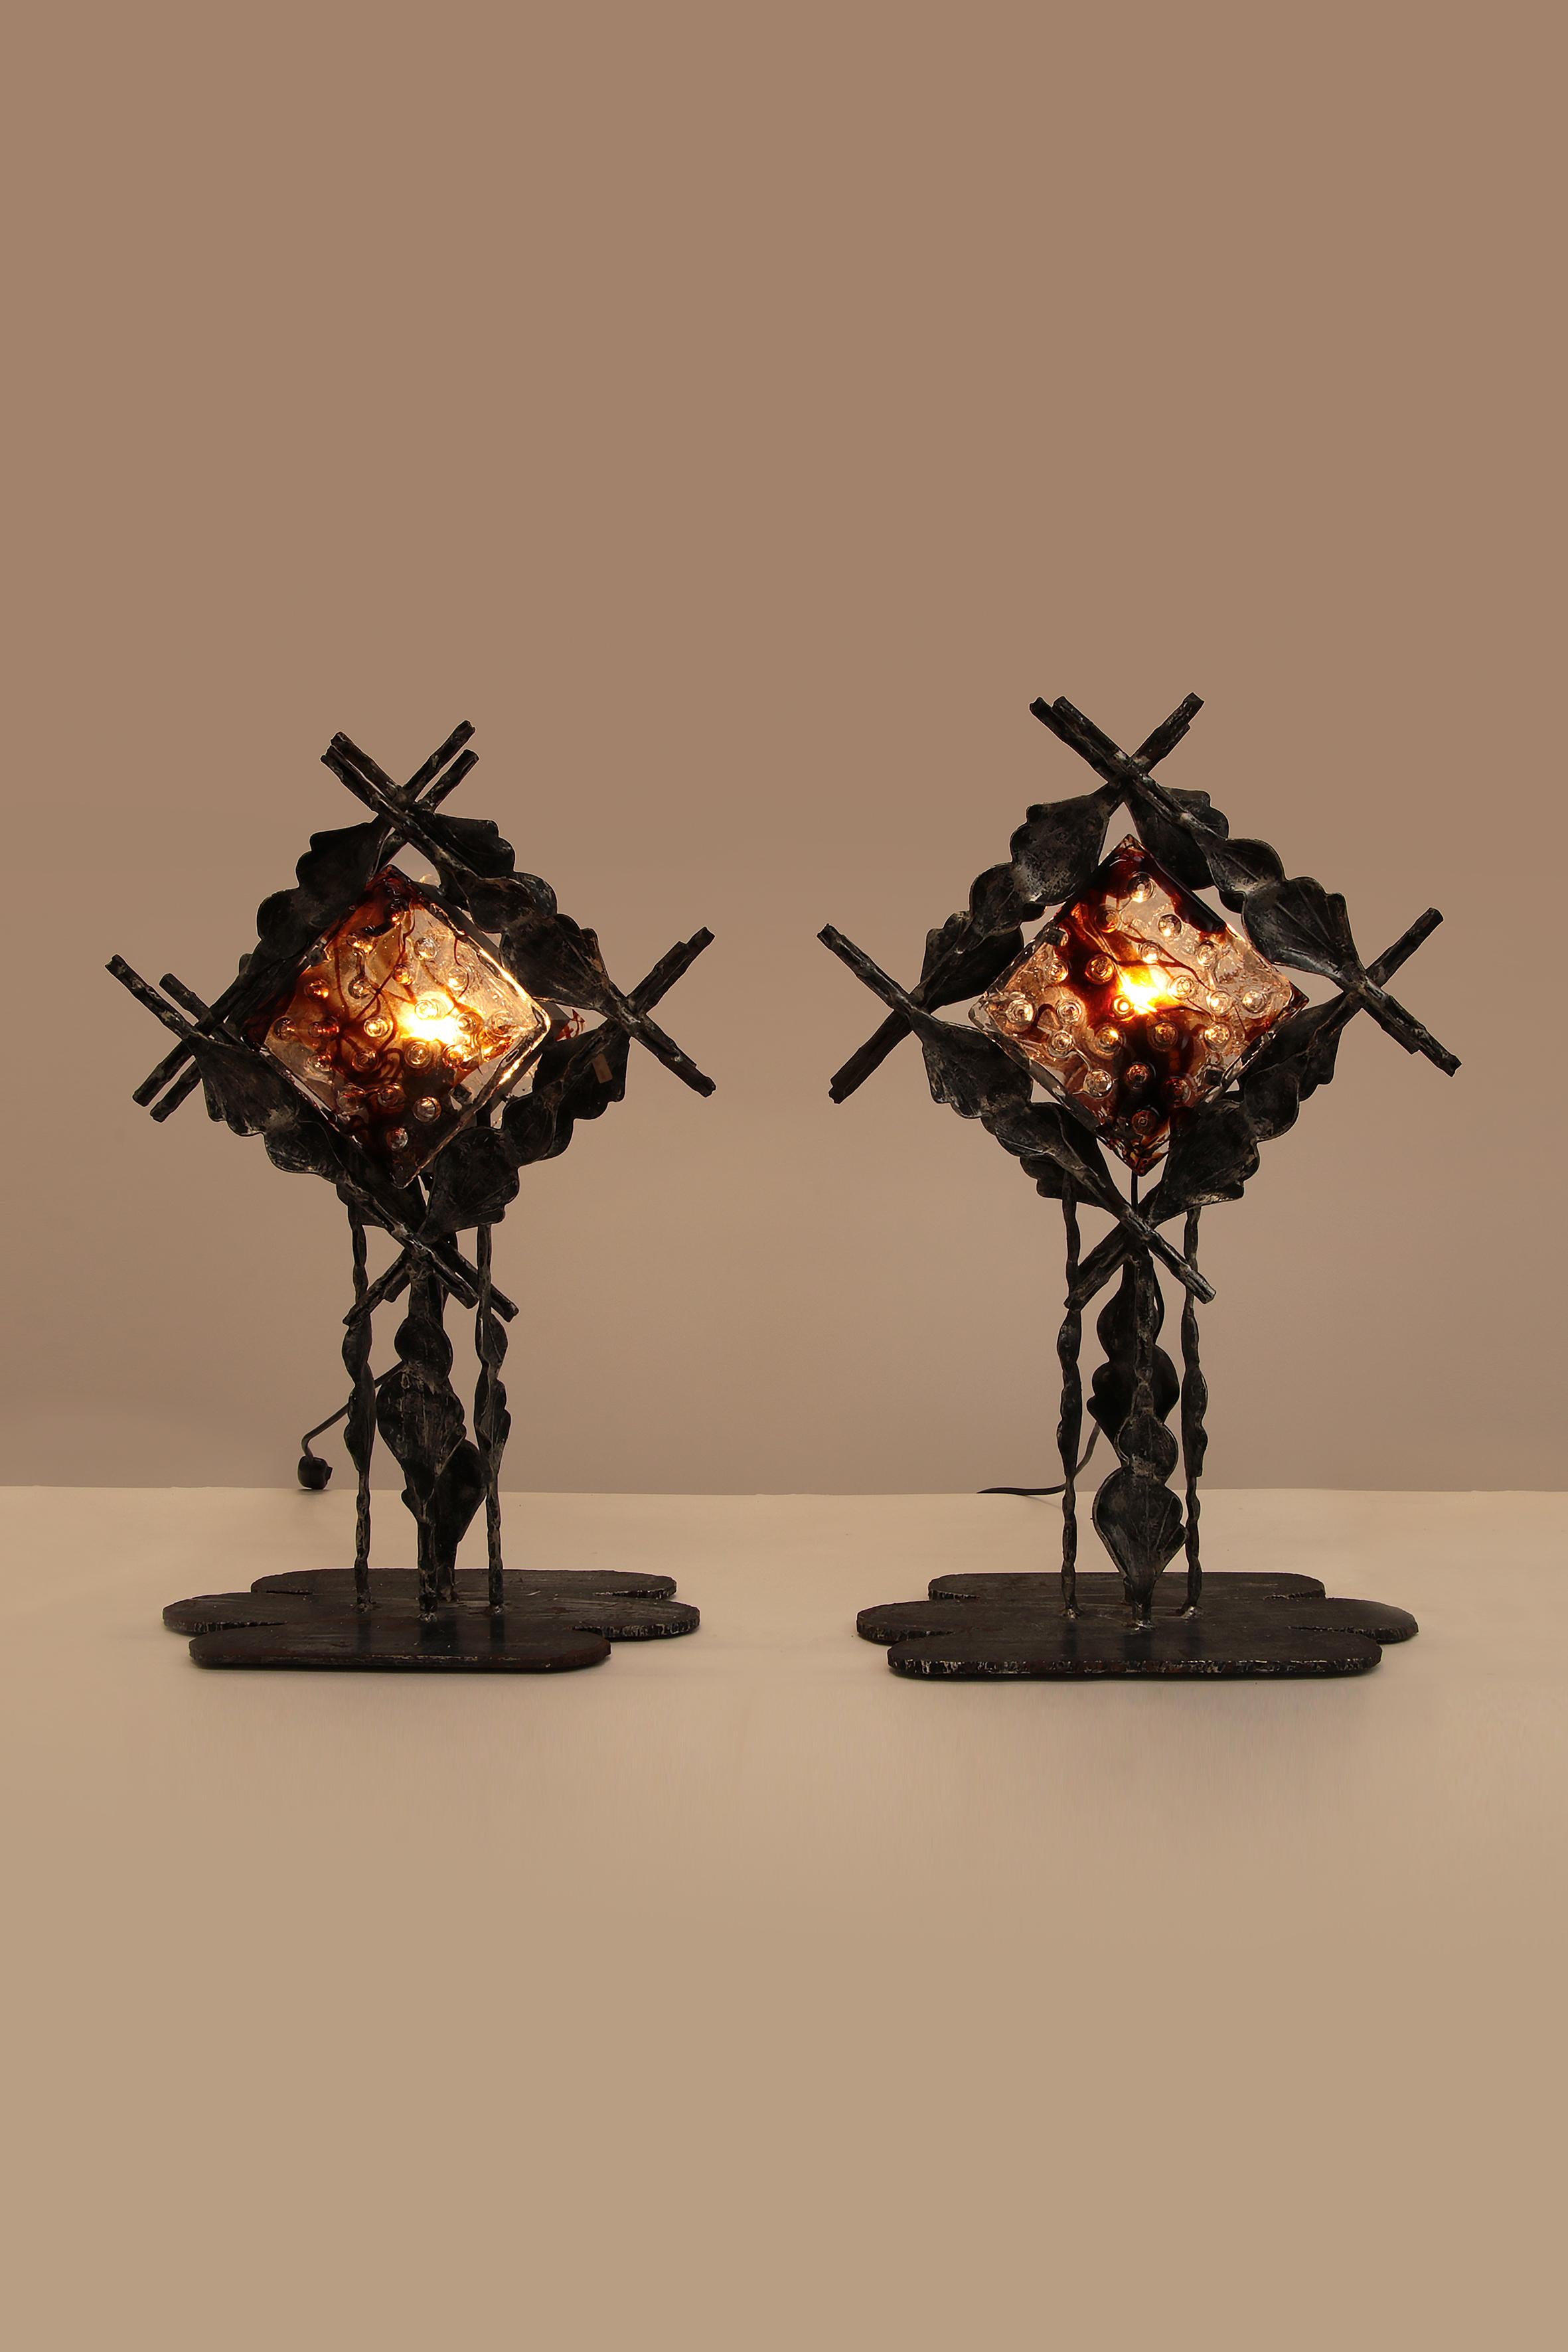 Italian Design Brutalist Table Lamps from Poliarte, Albano Poli, 1970s For Sale 7